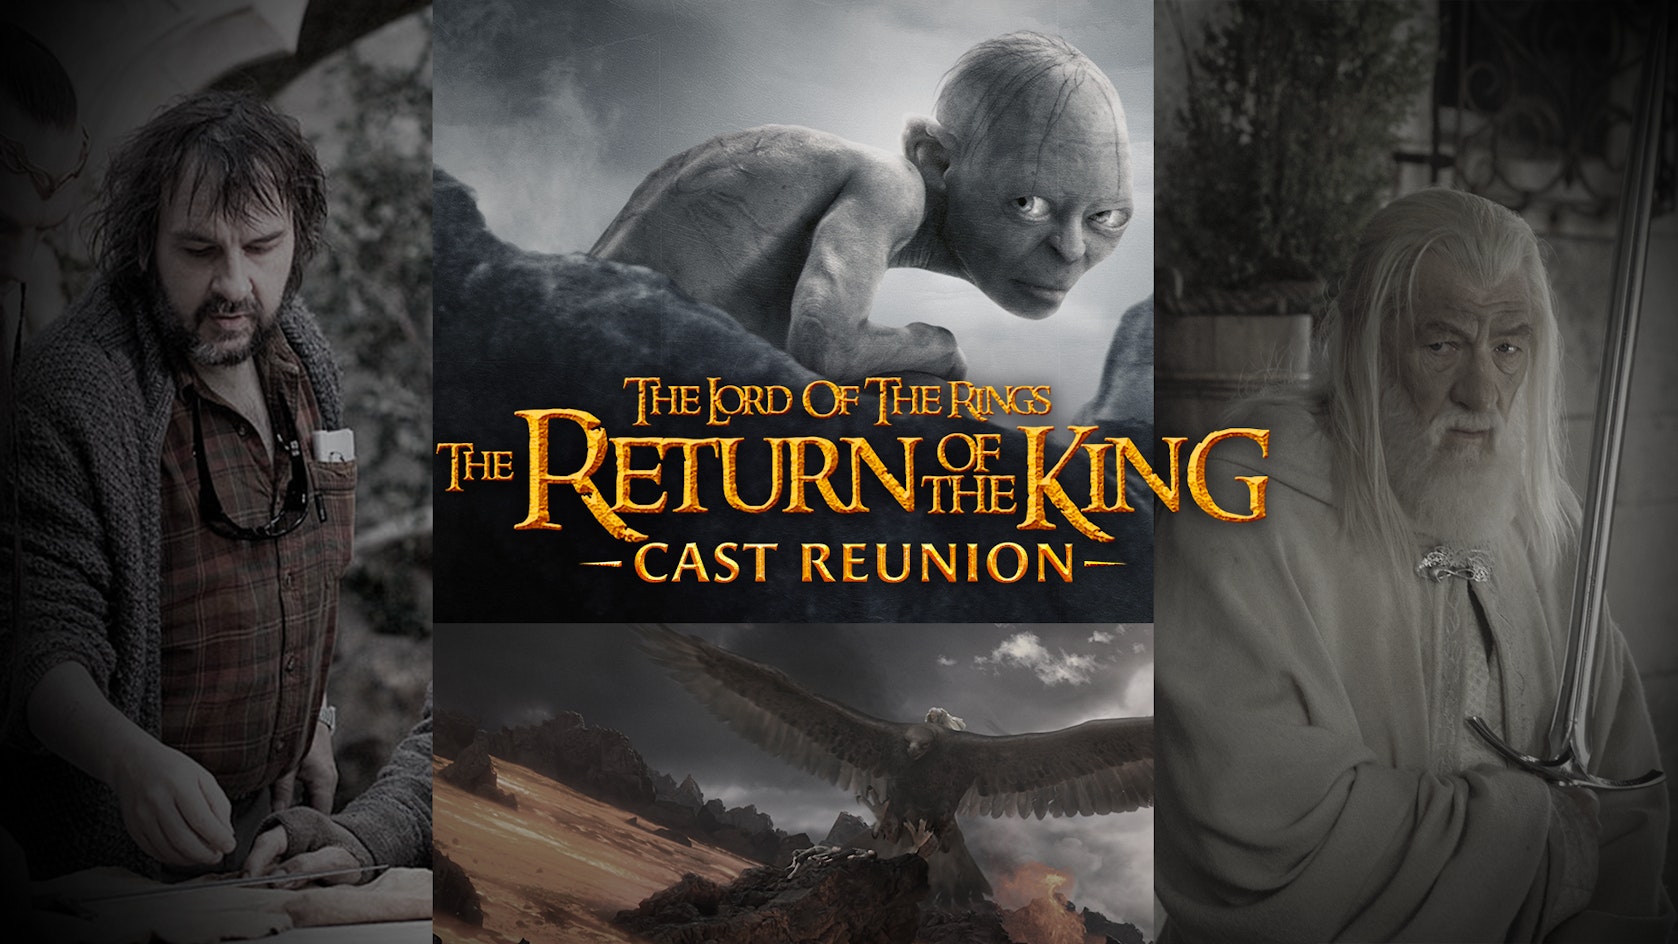 The Lord of the Rings The Return of the King Cast Reunion Alamo